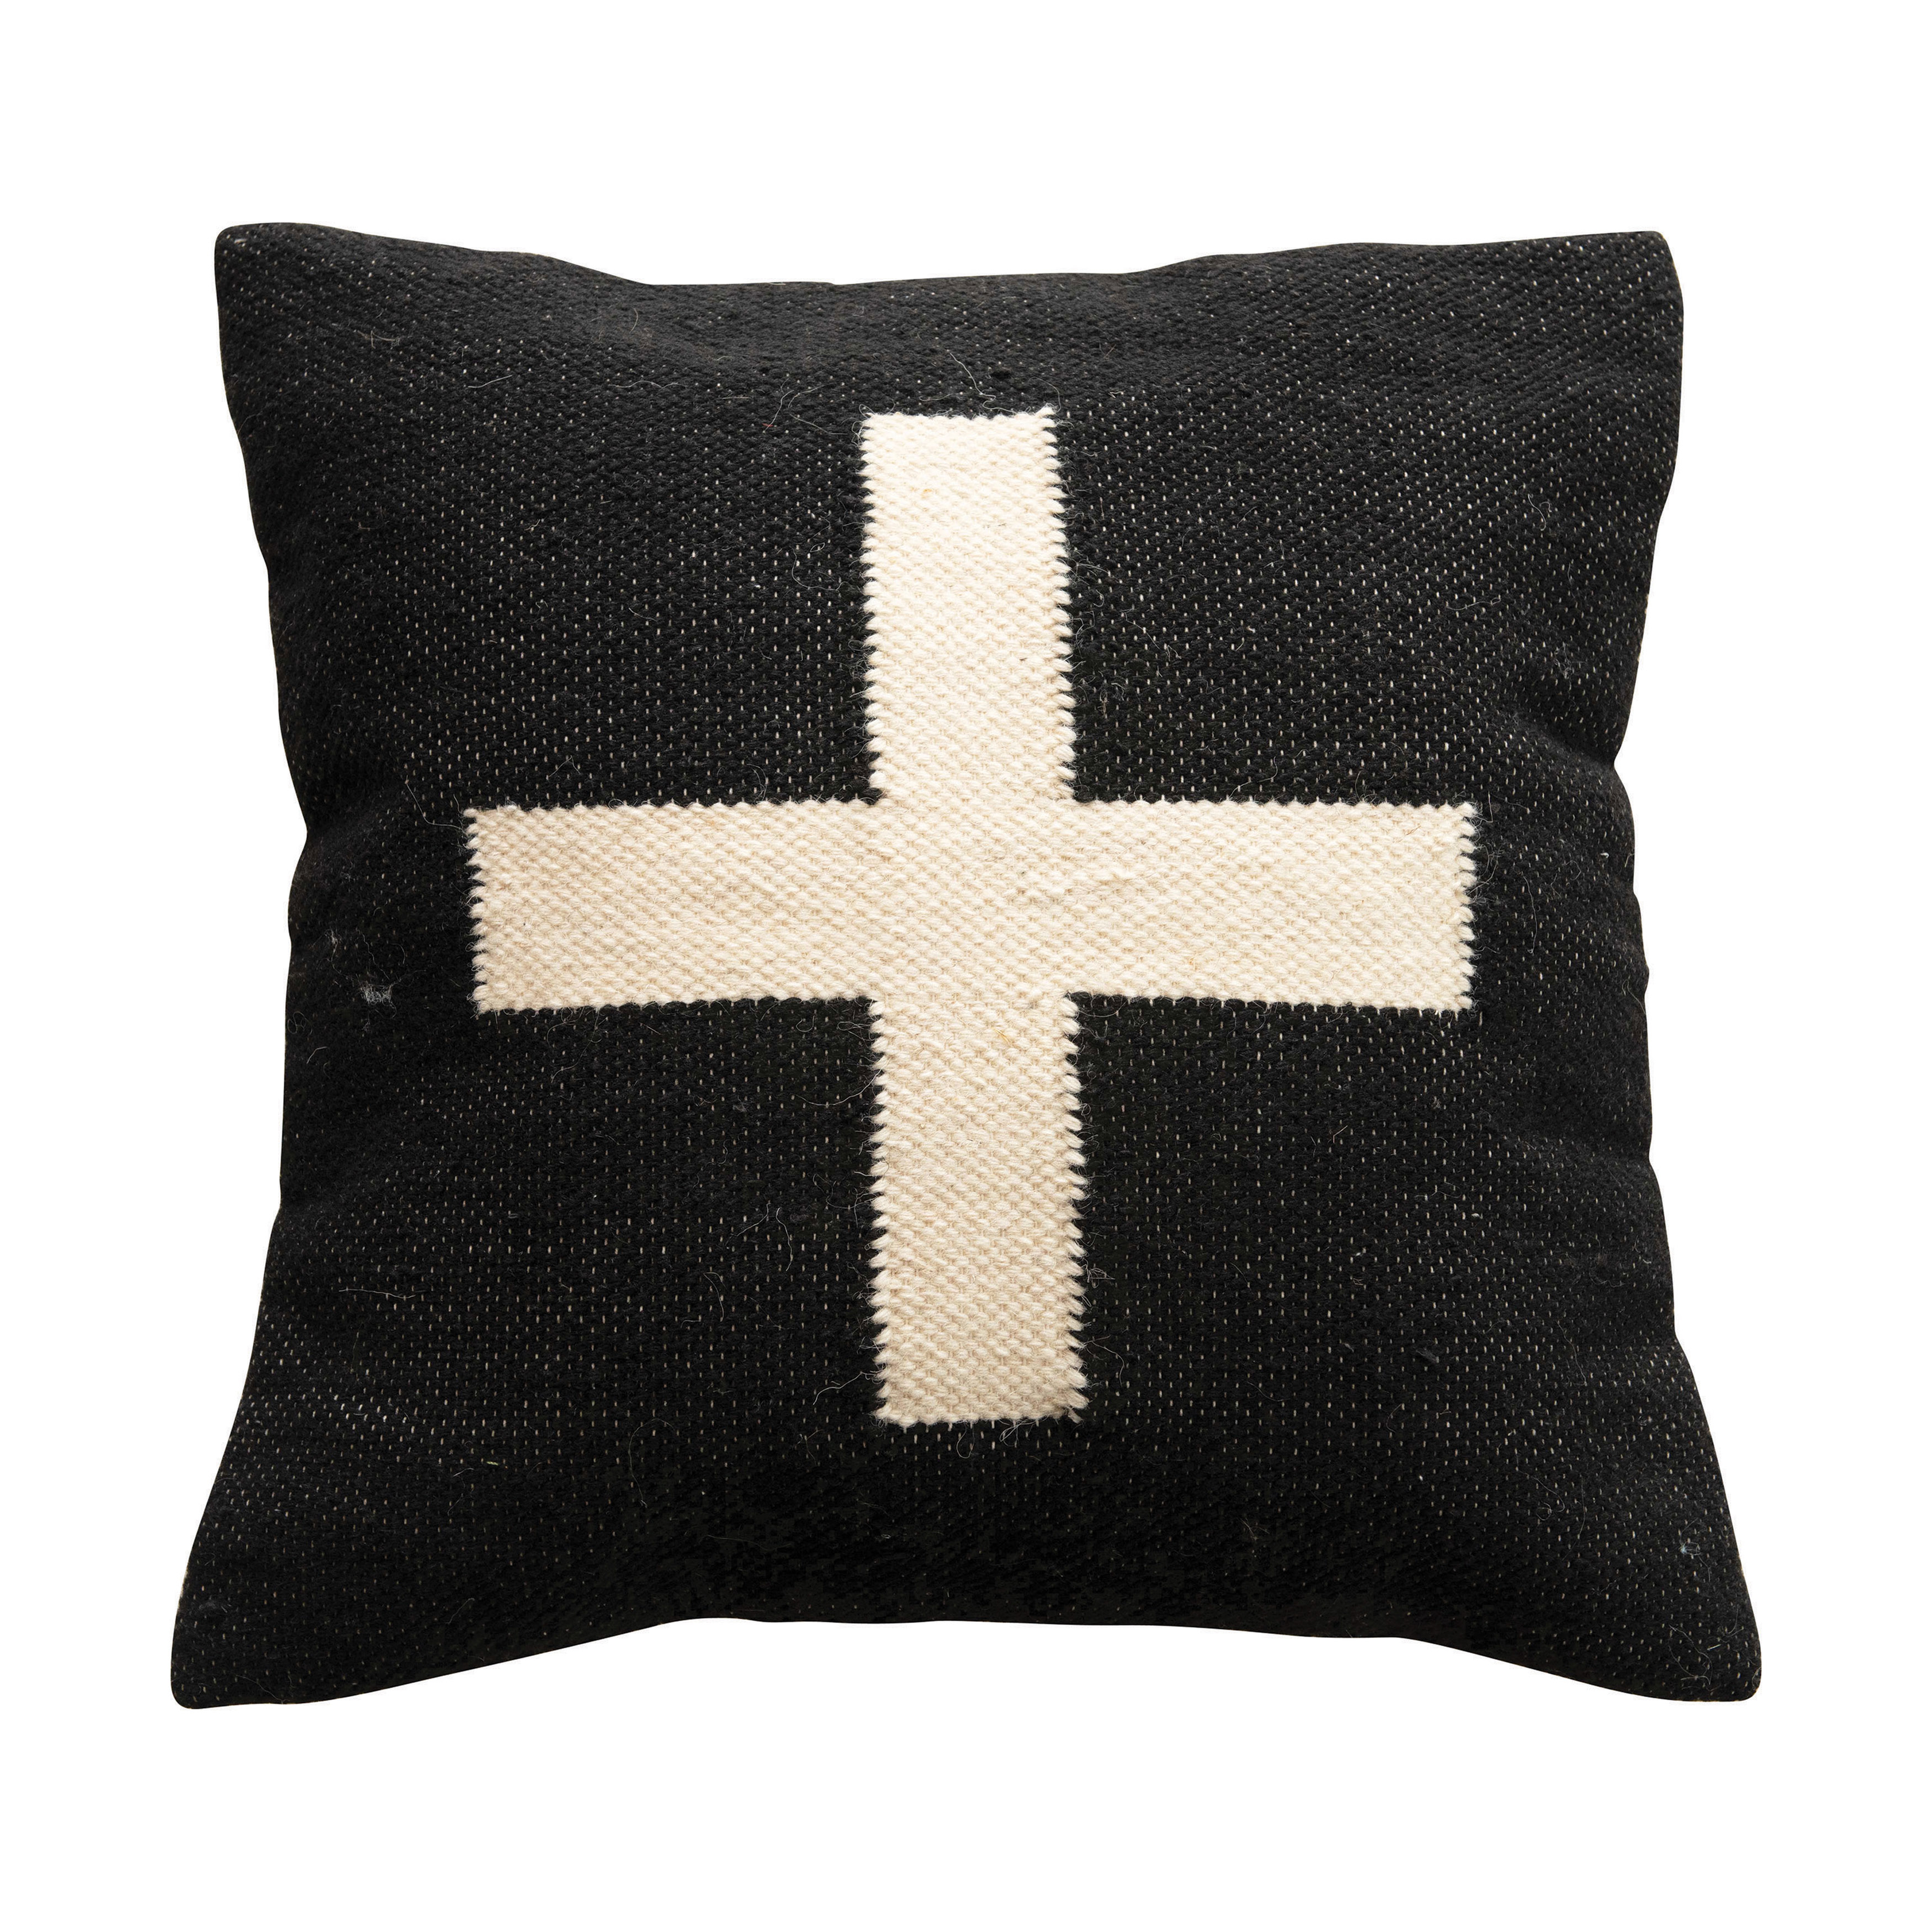 Wool Blend Pillow with Swiss Cross, Black & Cream Color - Nomad Home